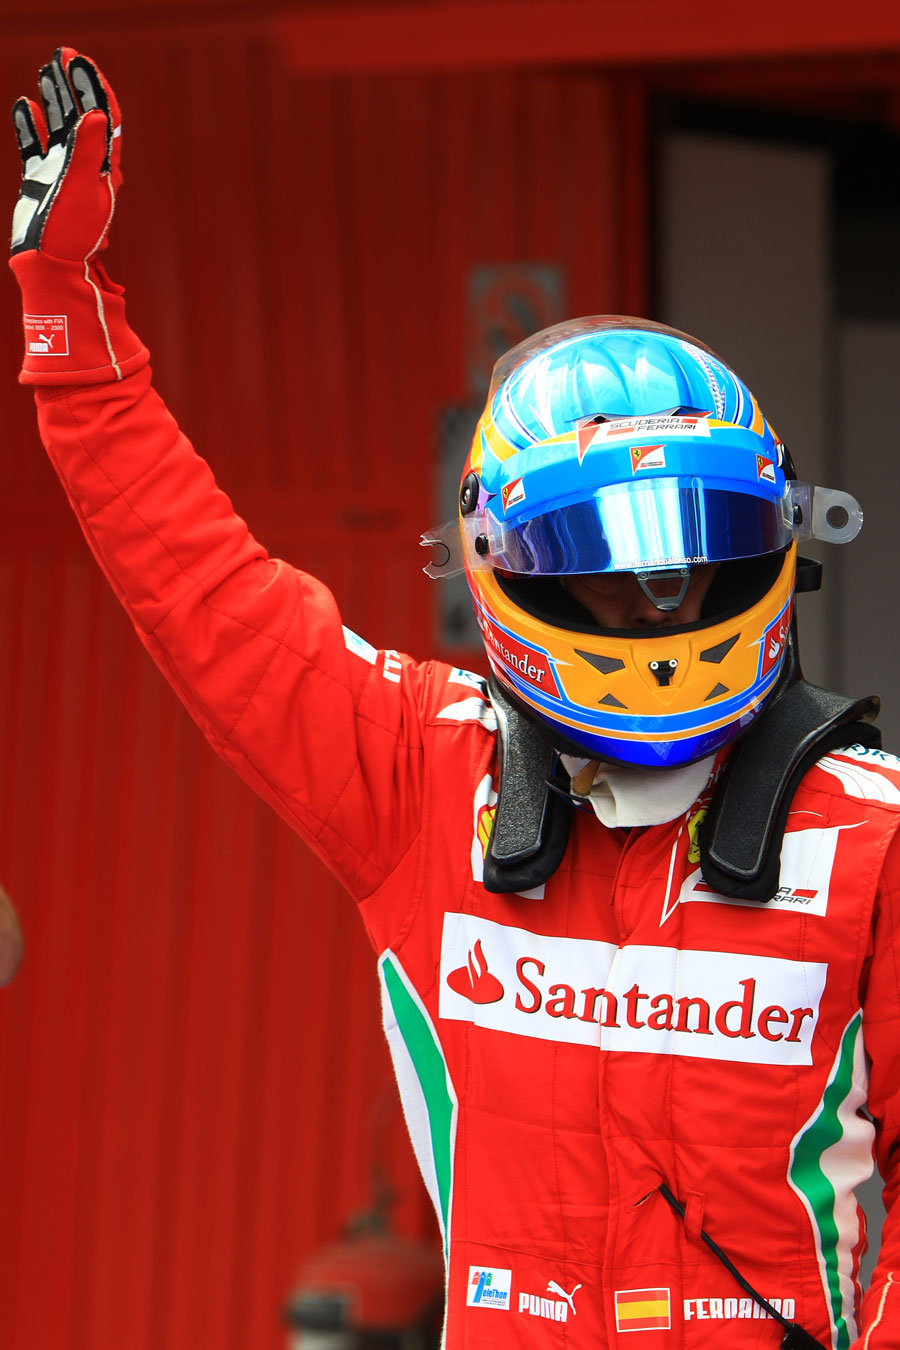 Fernando Alonso waves to his fans after qualifying